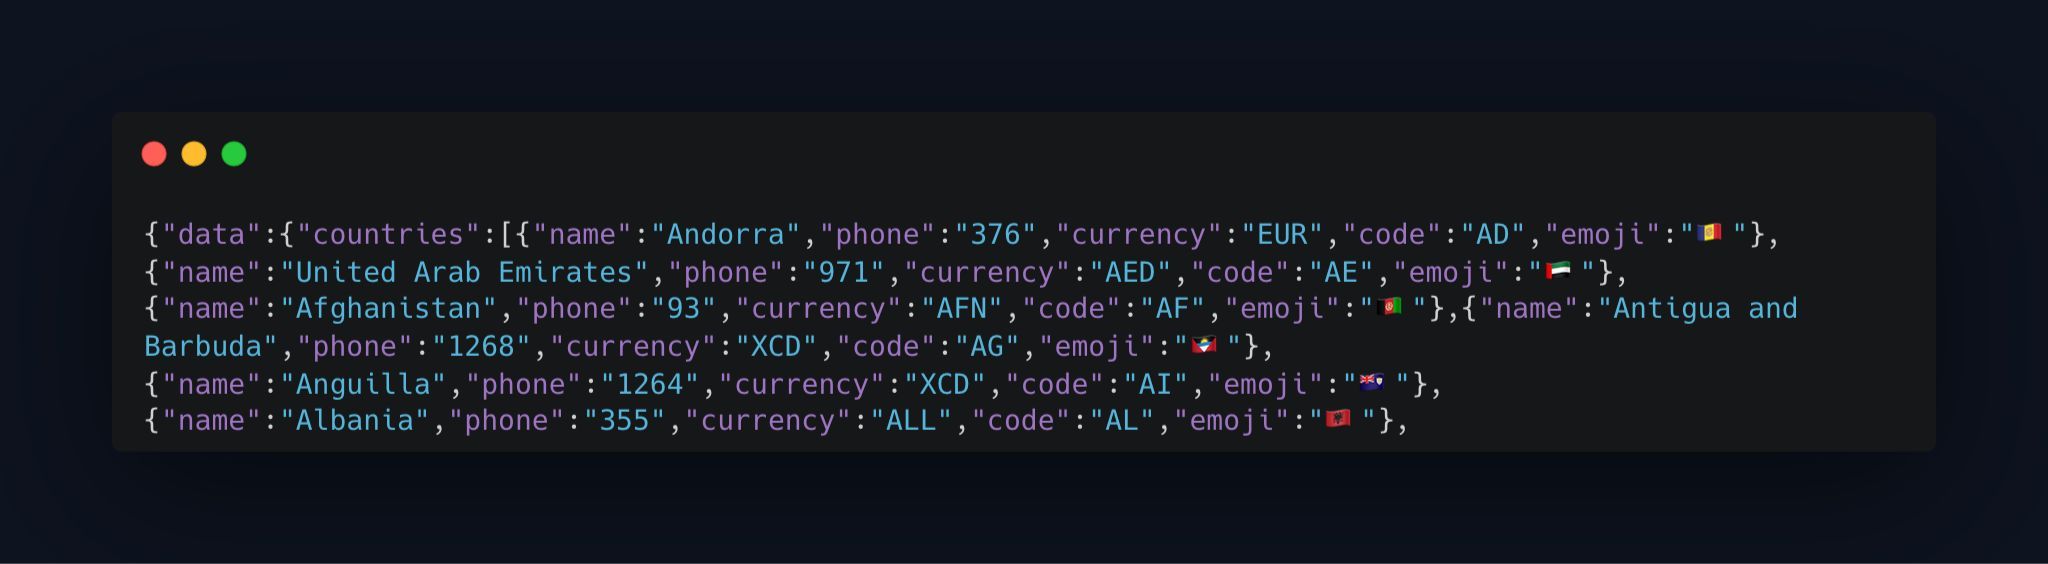 The output from a GraphQL API query shows a list of countries and their requested fields.